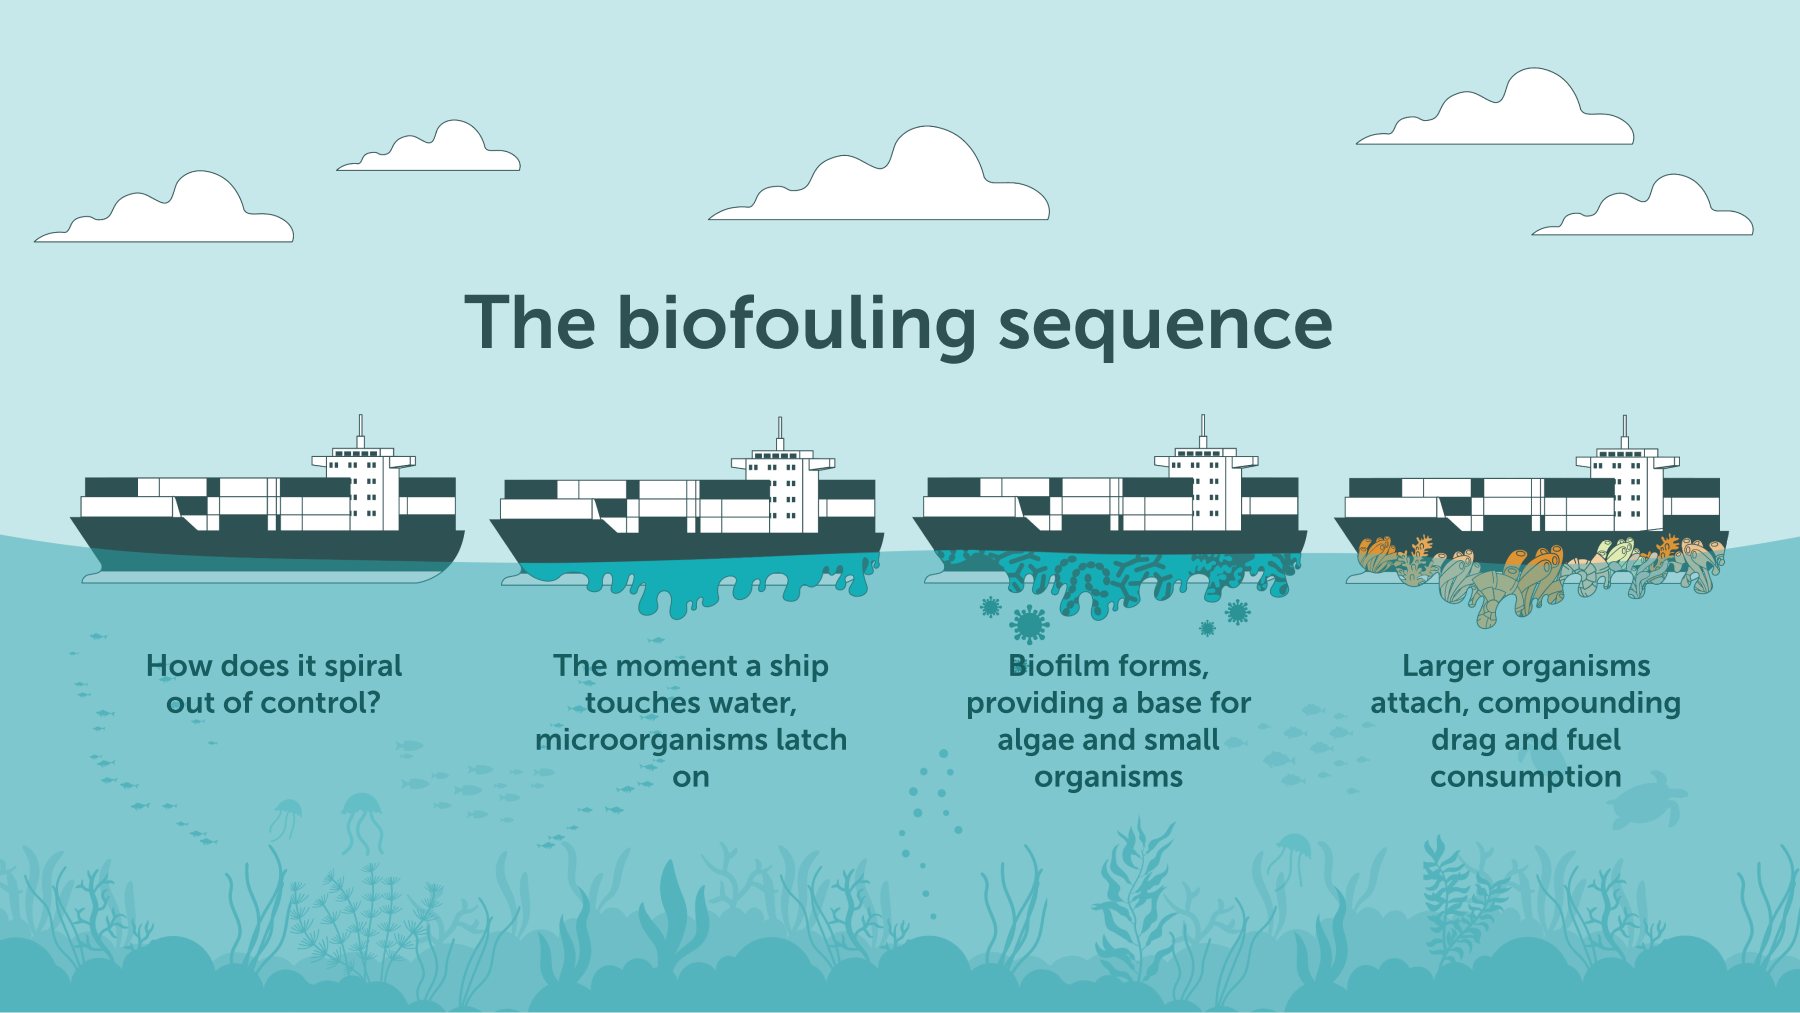 The biofouling sequence and its effects